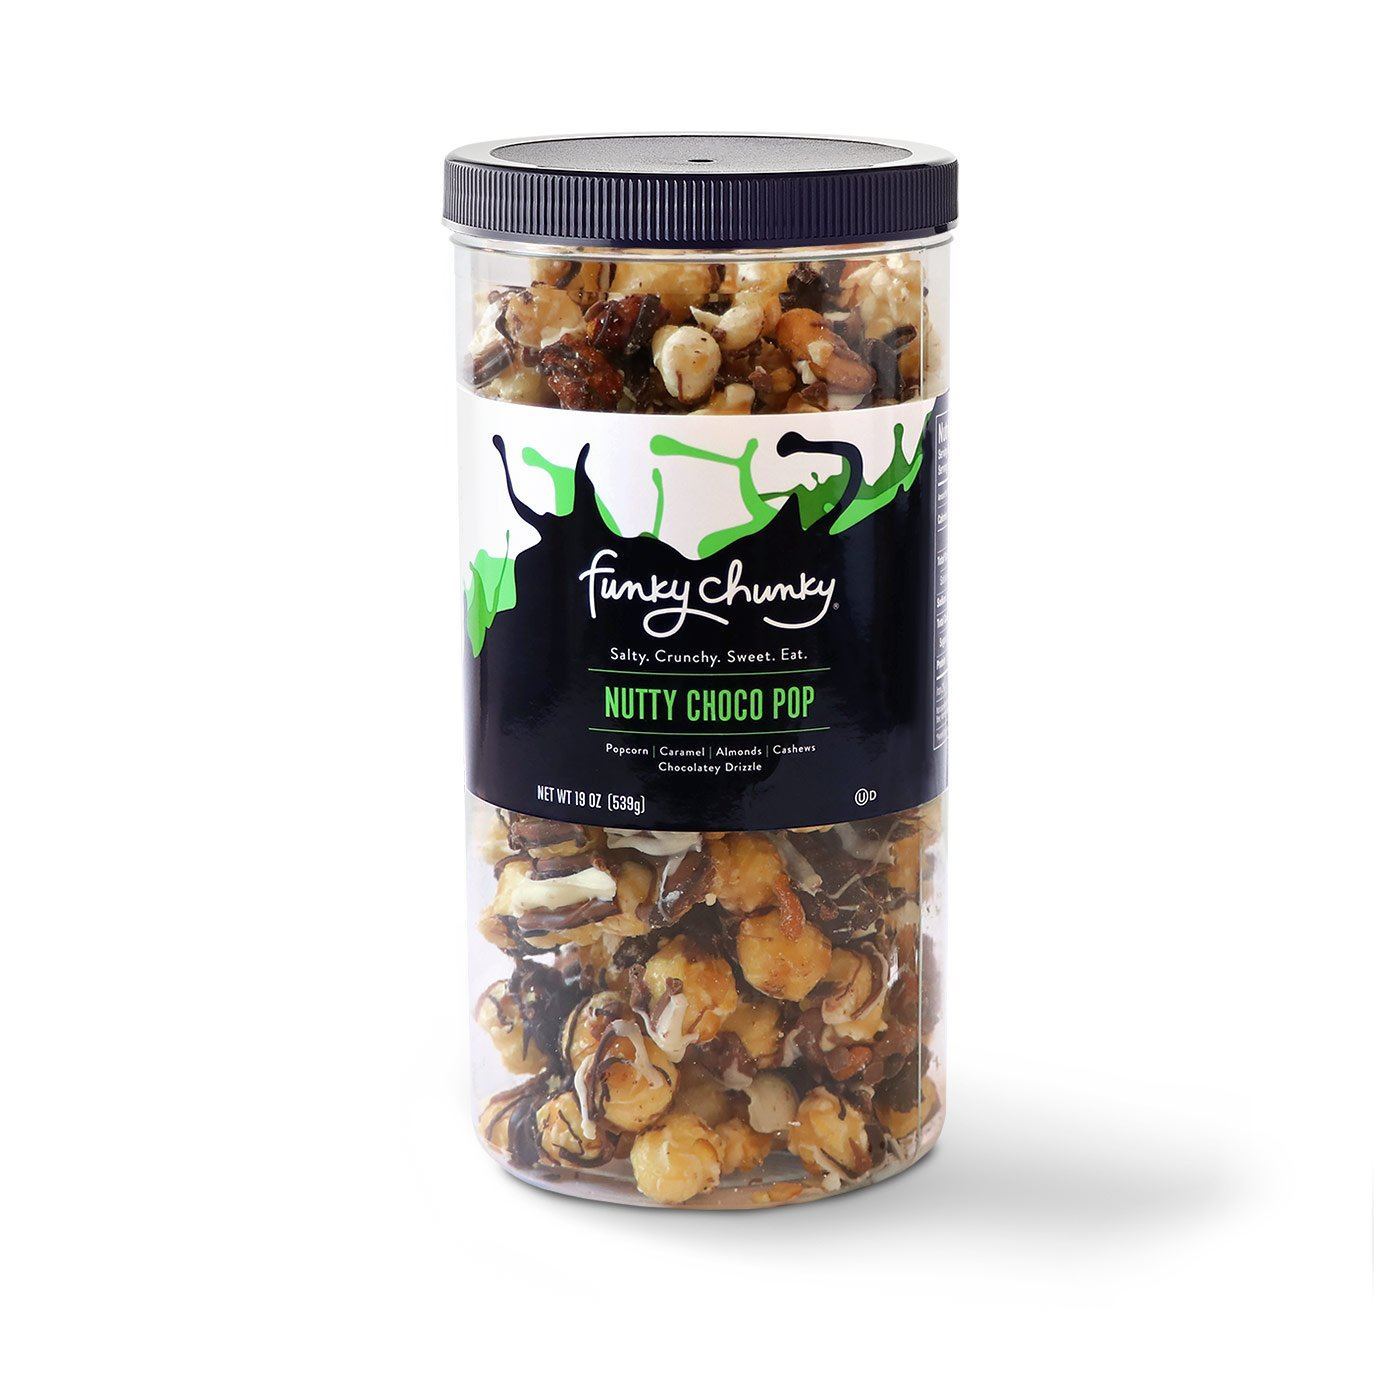 Tall Canisters (19oz.)-This tall, re-sealable canister of popcorn and pretzel mixes are our most popular size and makes a great office party favor, hostess or business gift. Each canister contains nineteen gourmet popcorn confection servings.-Funky Chunky